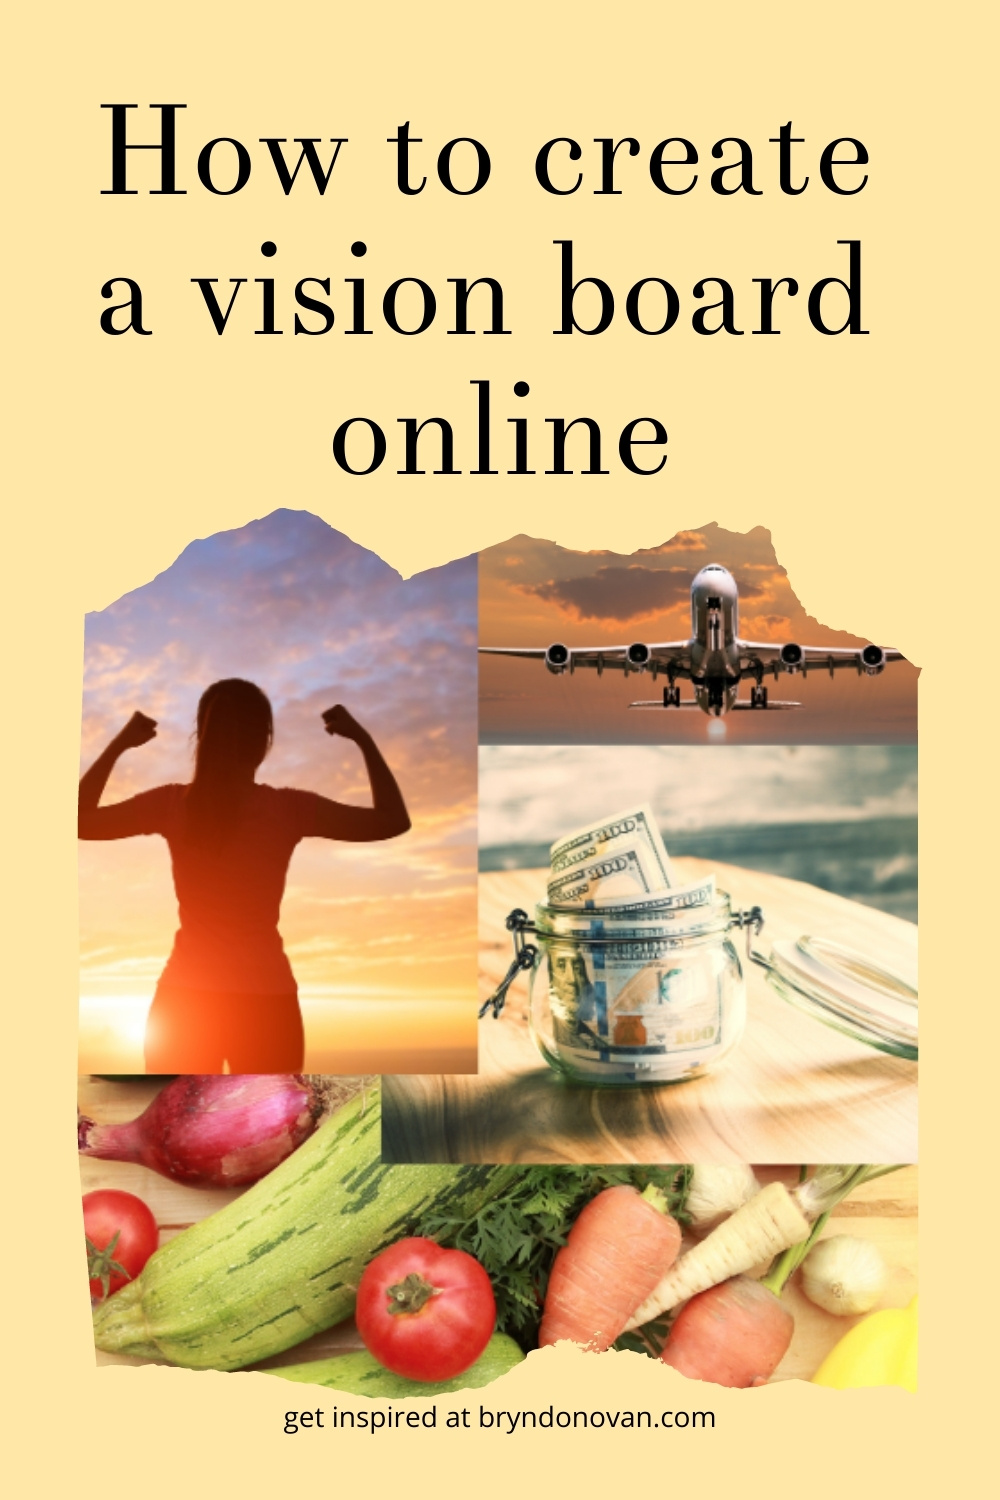 HOW TO CREATE A VISION BOARD ONLINE | includes vision board examples, ideas, and categories